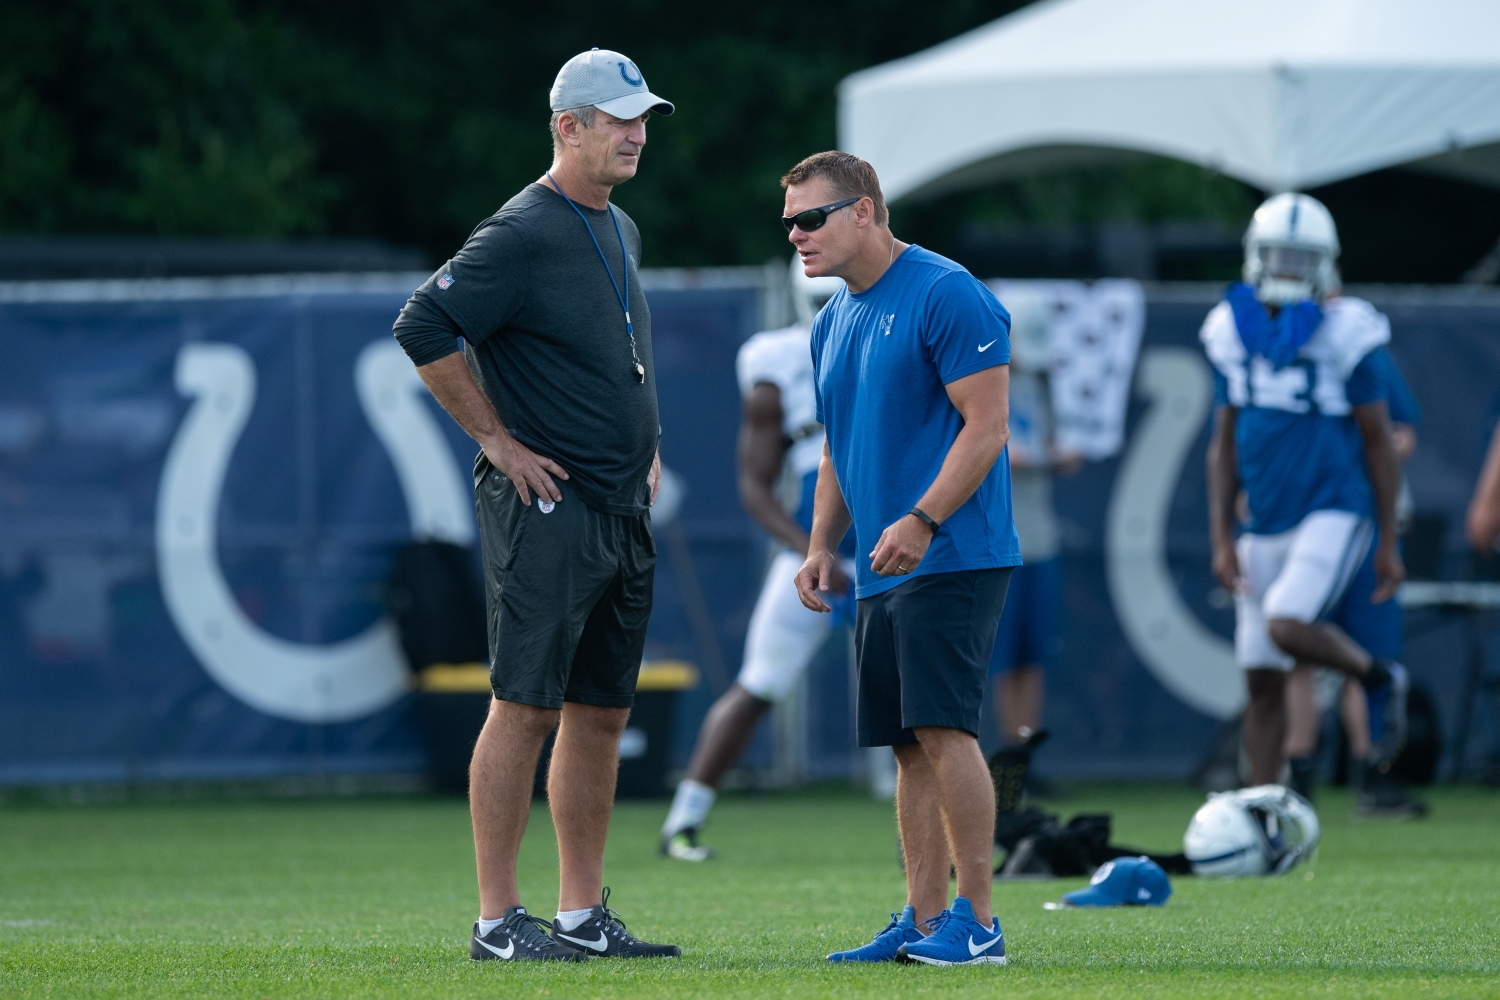 Indianapolis Colts general manager Chris Ballard talks to head coach Frank Reich on the field before the Indianapolis Colts training camp practice.